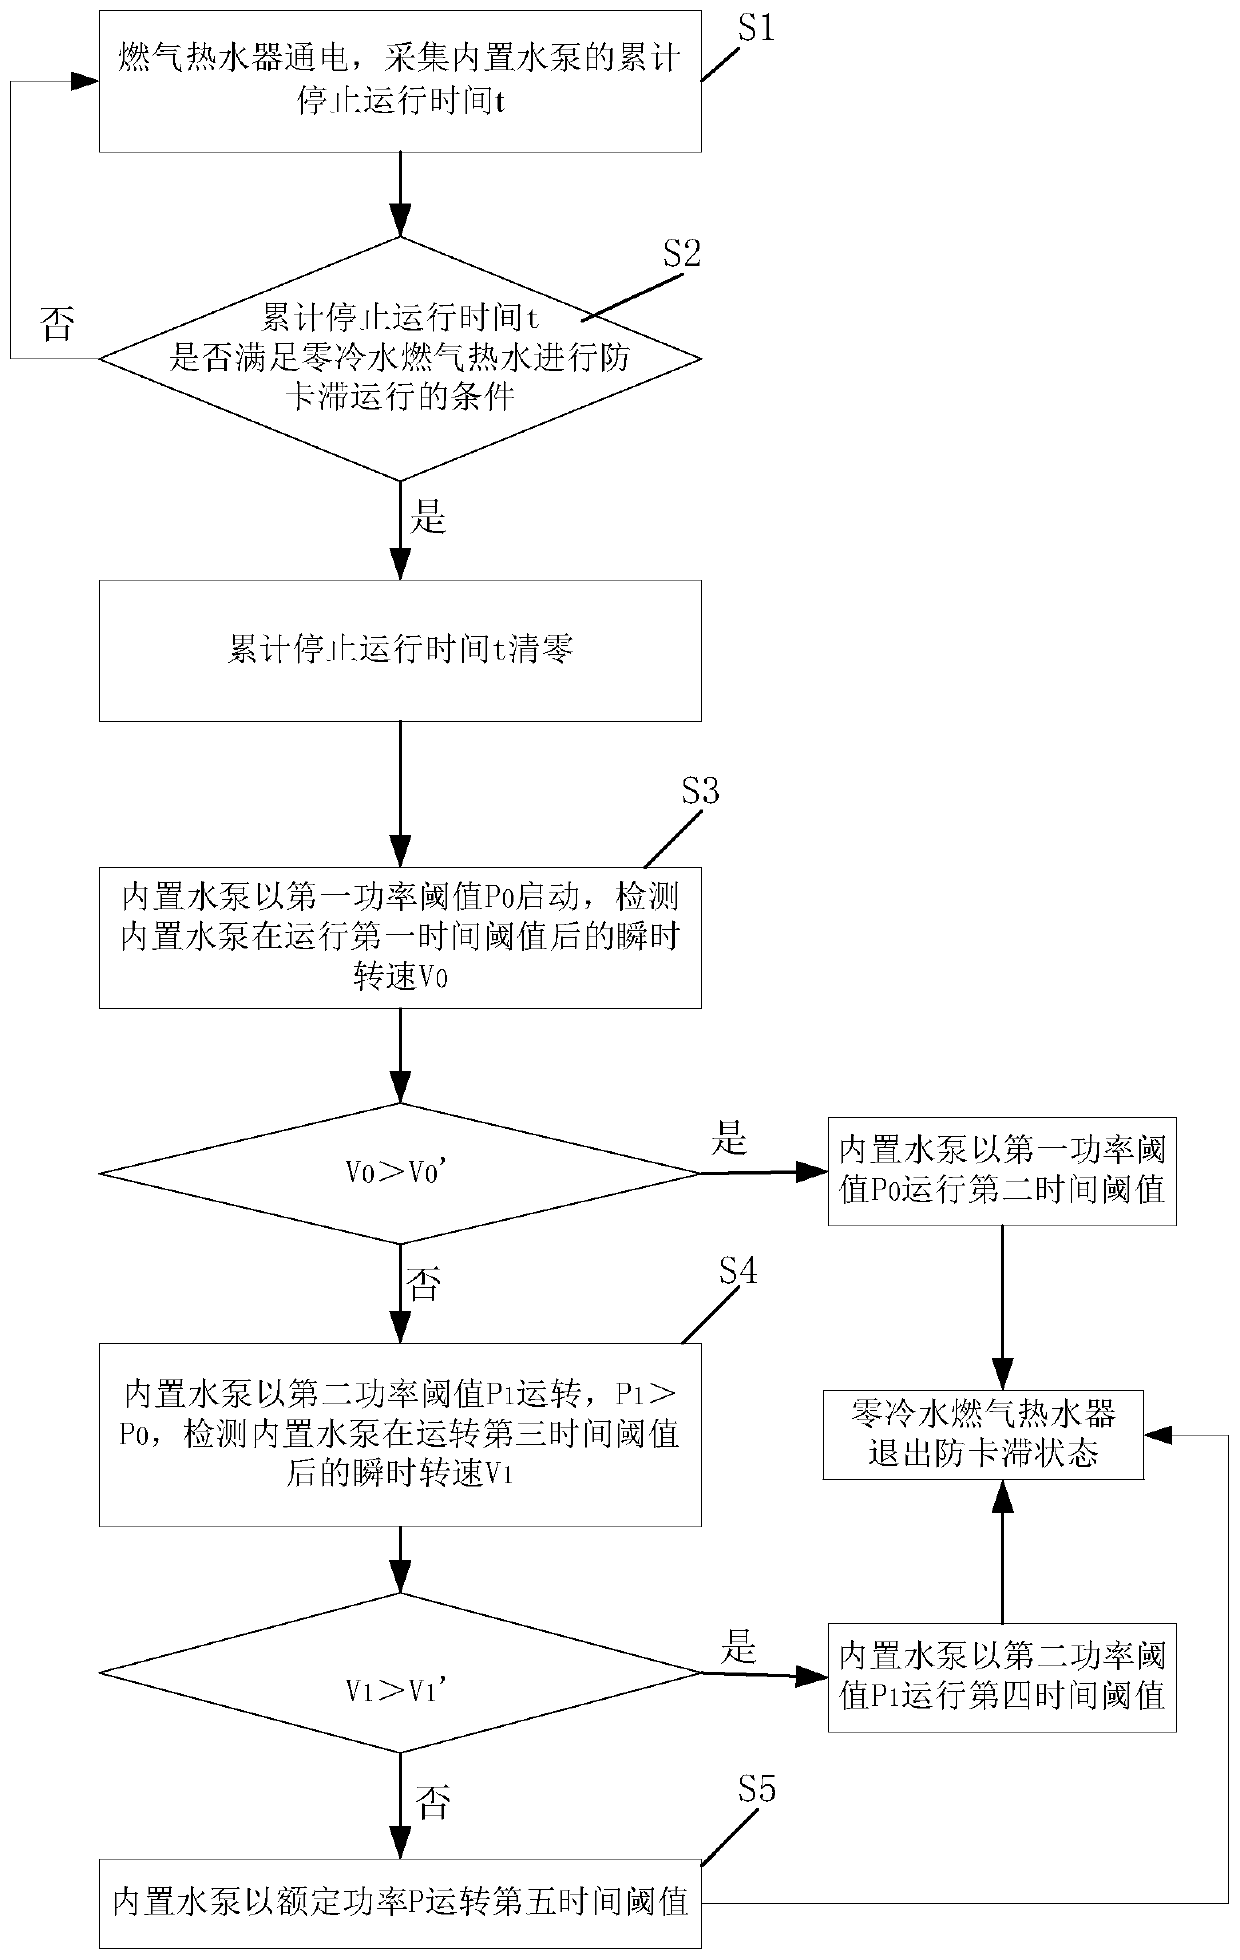 Anti-clamping stagnation control method for zero-cold-water gas hot water built-in water pump